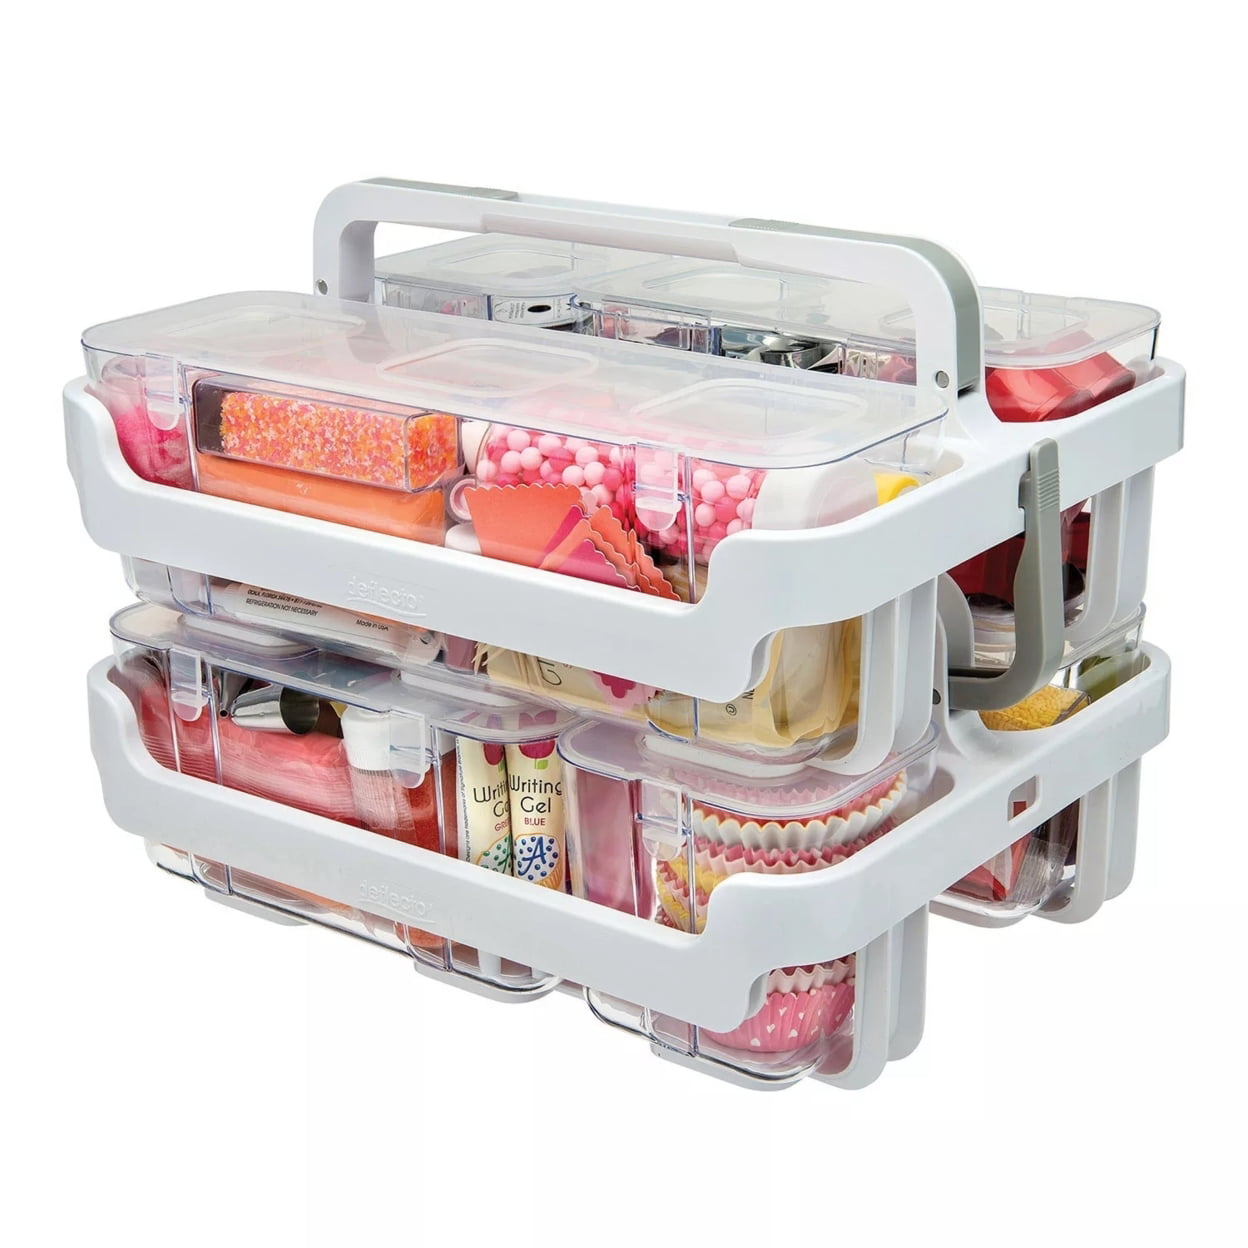 Deflecto Stackable Caddy Organizer, Deflecto have the answers to all your  storage needs! Shop with us today: Deflecto on .co.uk:   #deflectoeurope #craftstorage, By Deflecto  Europe